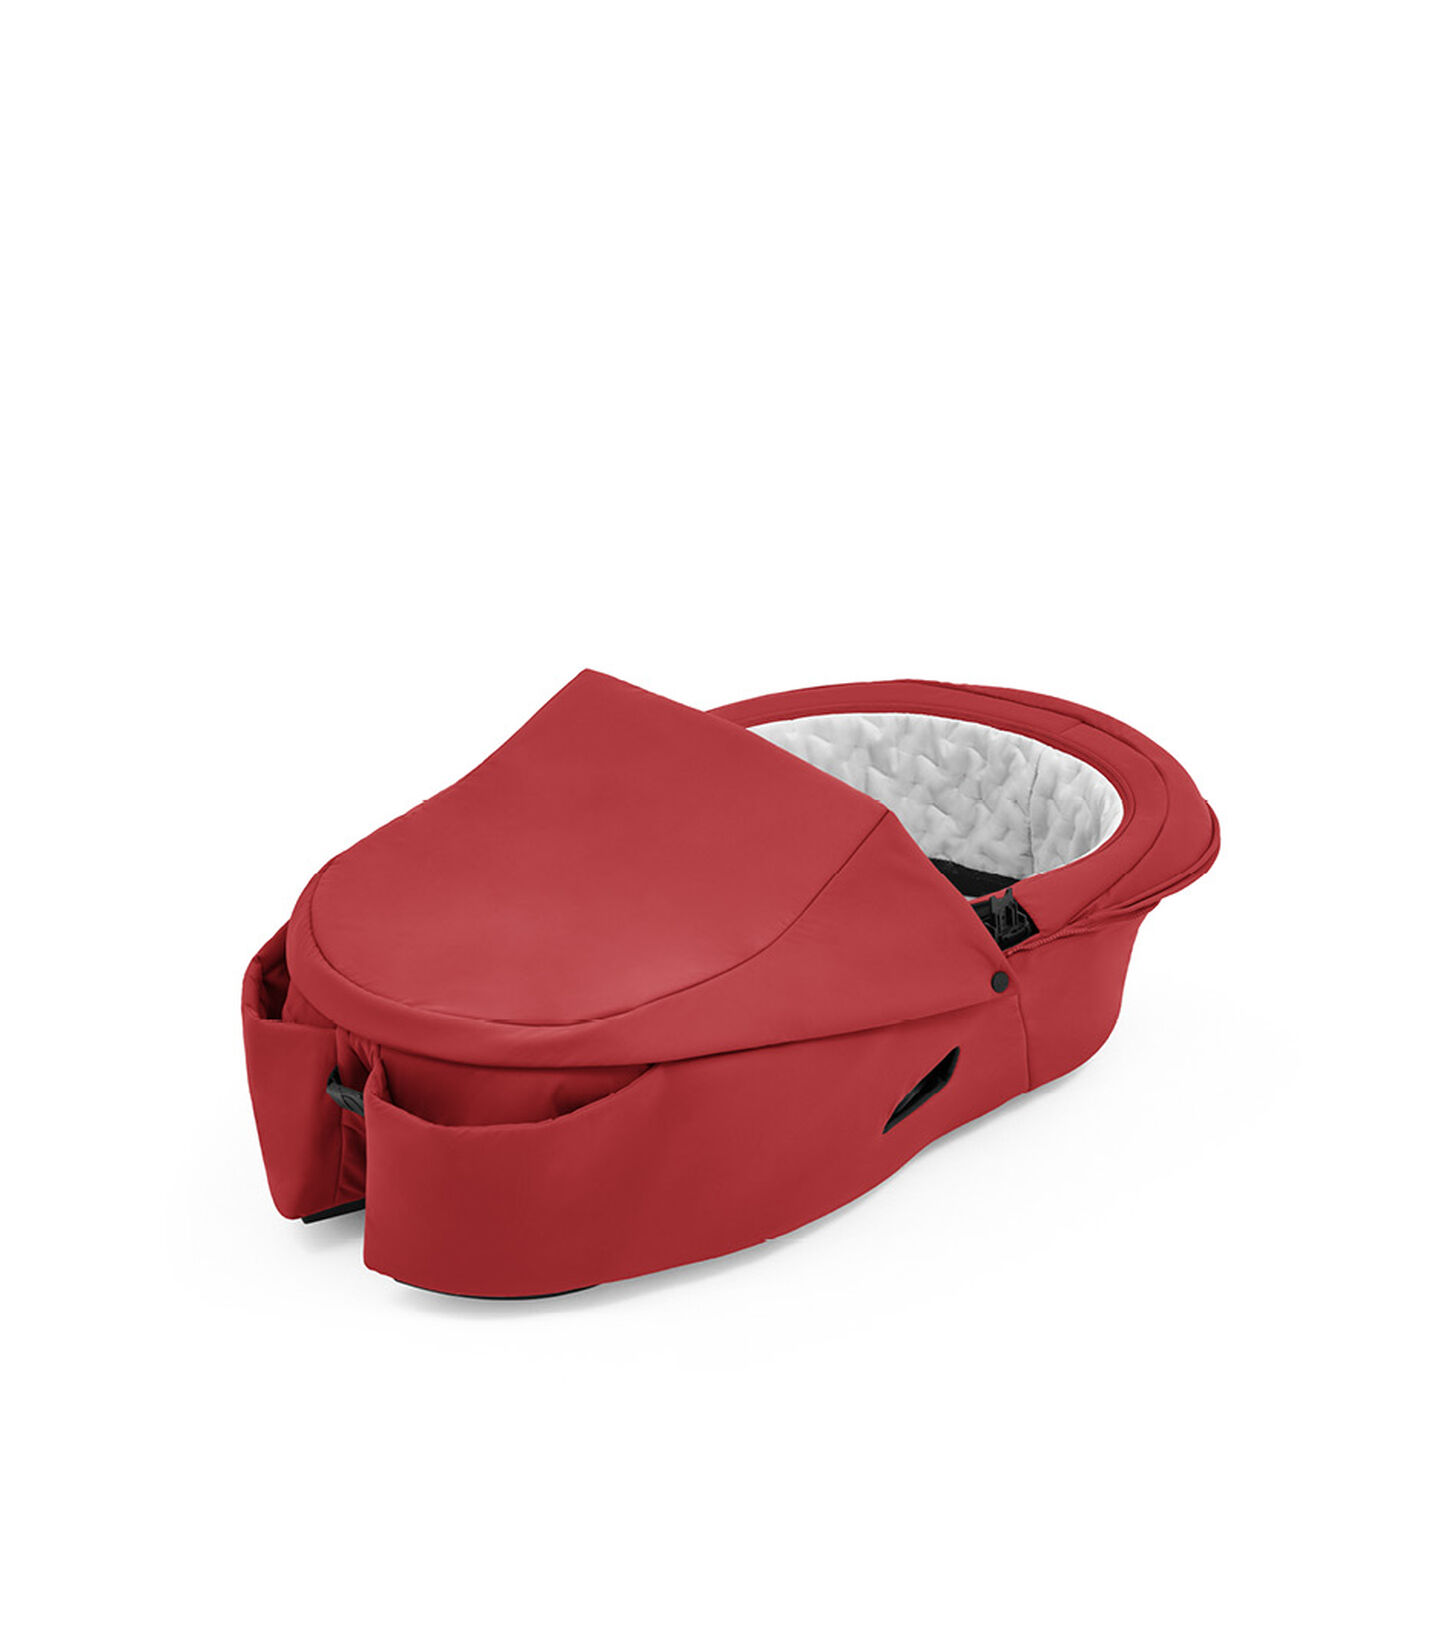 Stokke® Xplory® X Babyschale Ruby Red, Ruby Red, mainview view 1